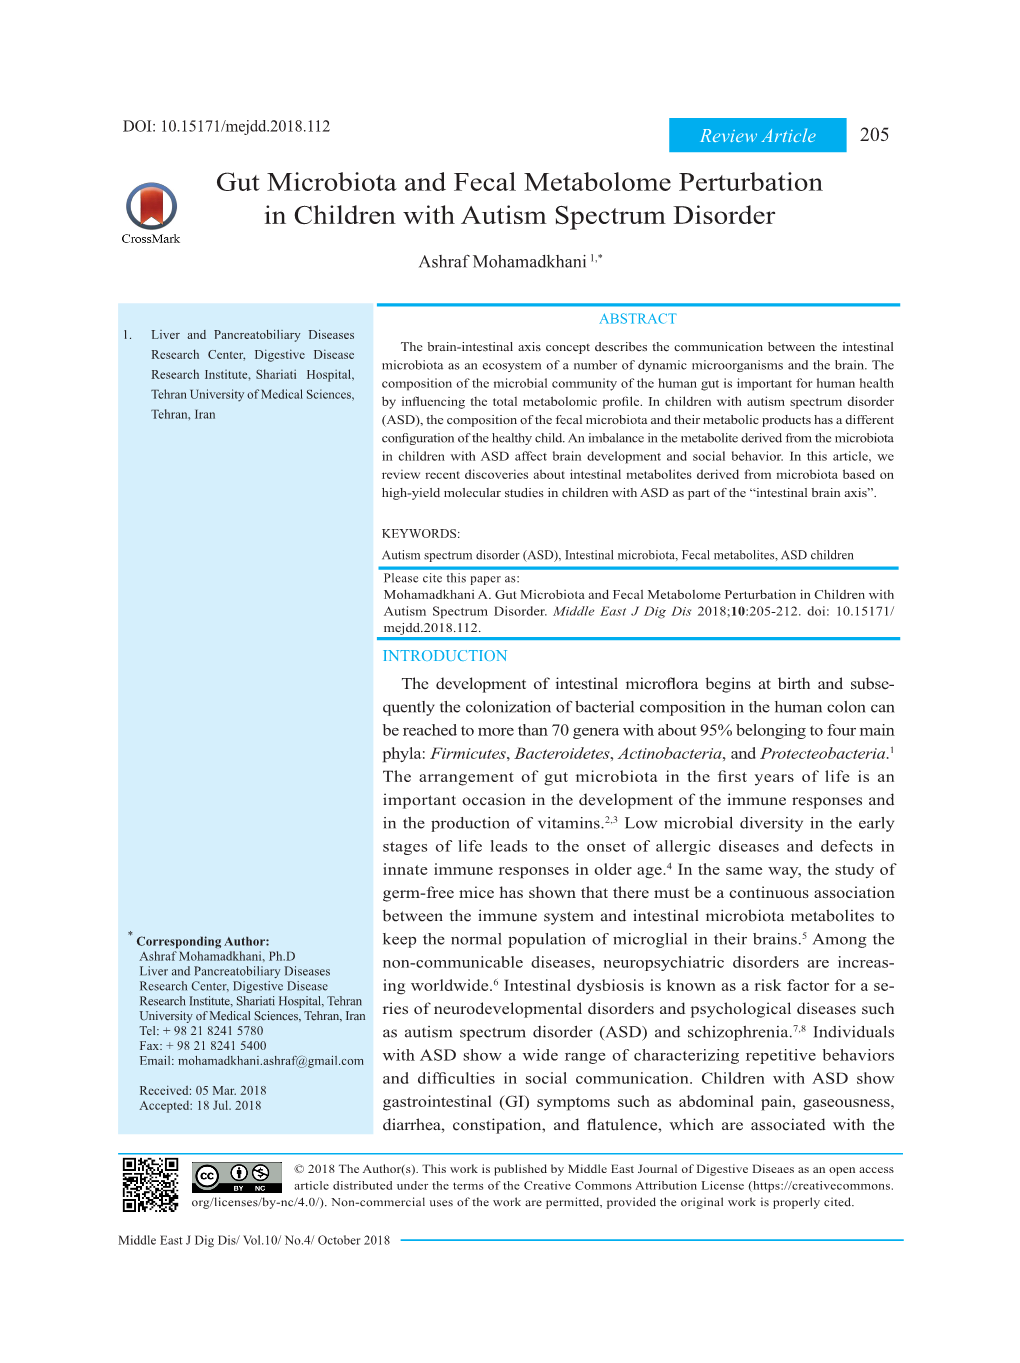 Gut Microbiota and Fecal Metabolome Perturbation in Children with Autism Spectrum Disorder